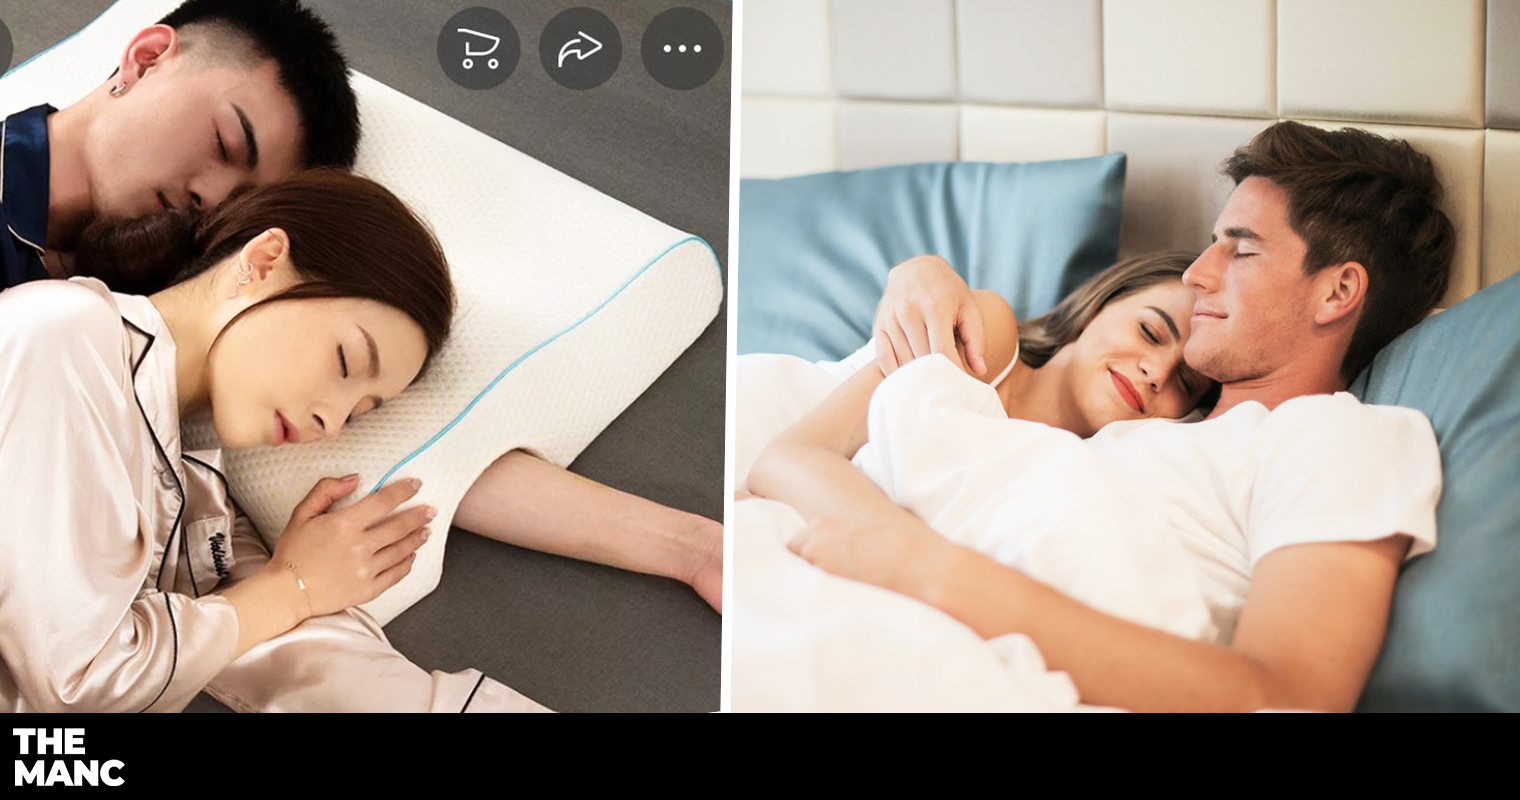 This Pillow Has Been Designed To Make Spooning Better For Everyone 